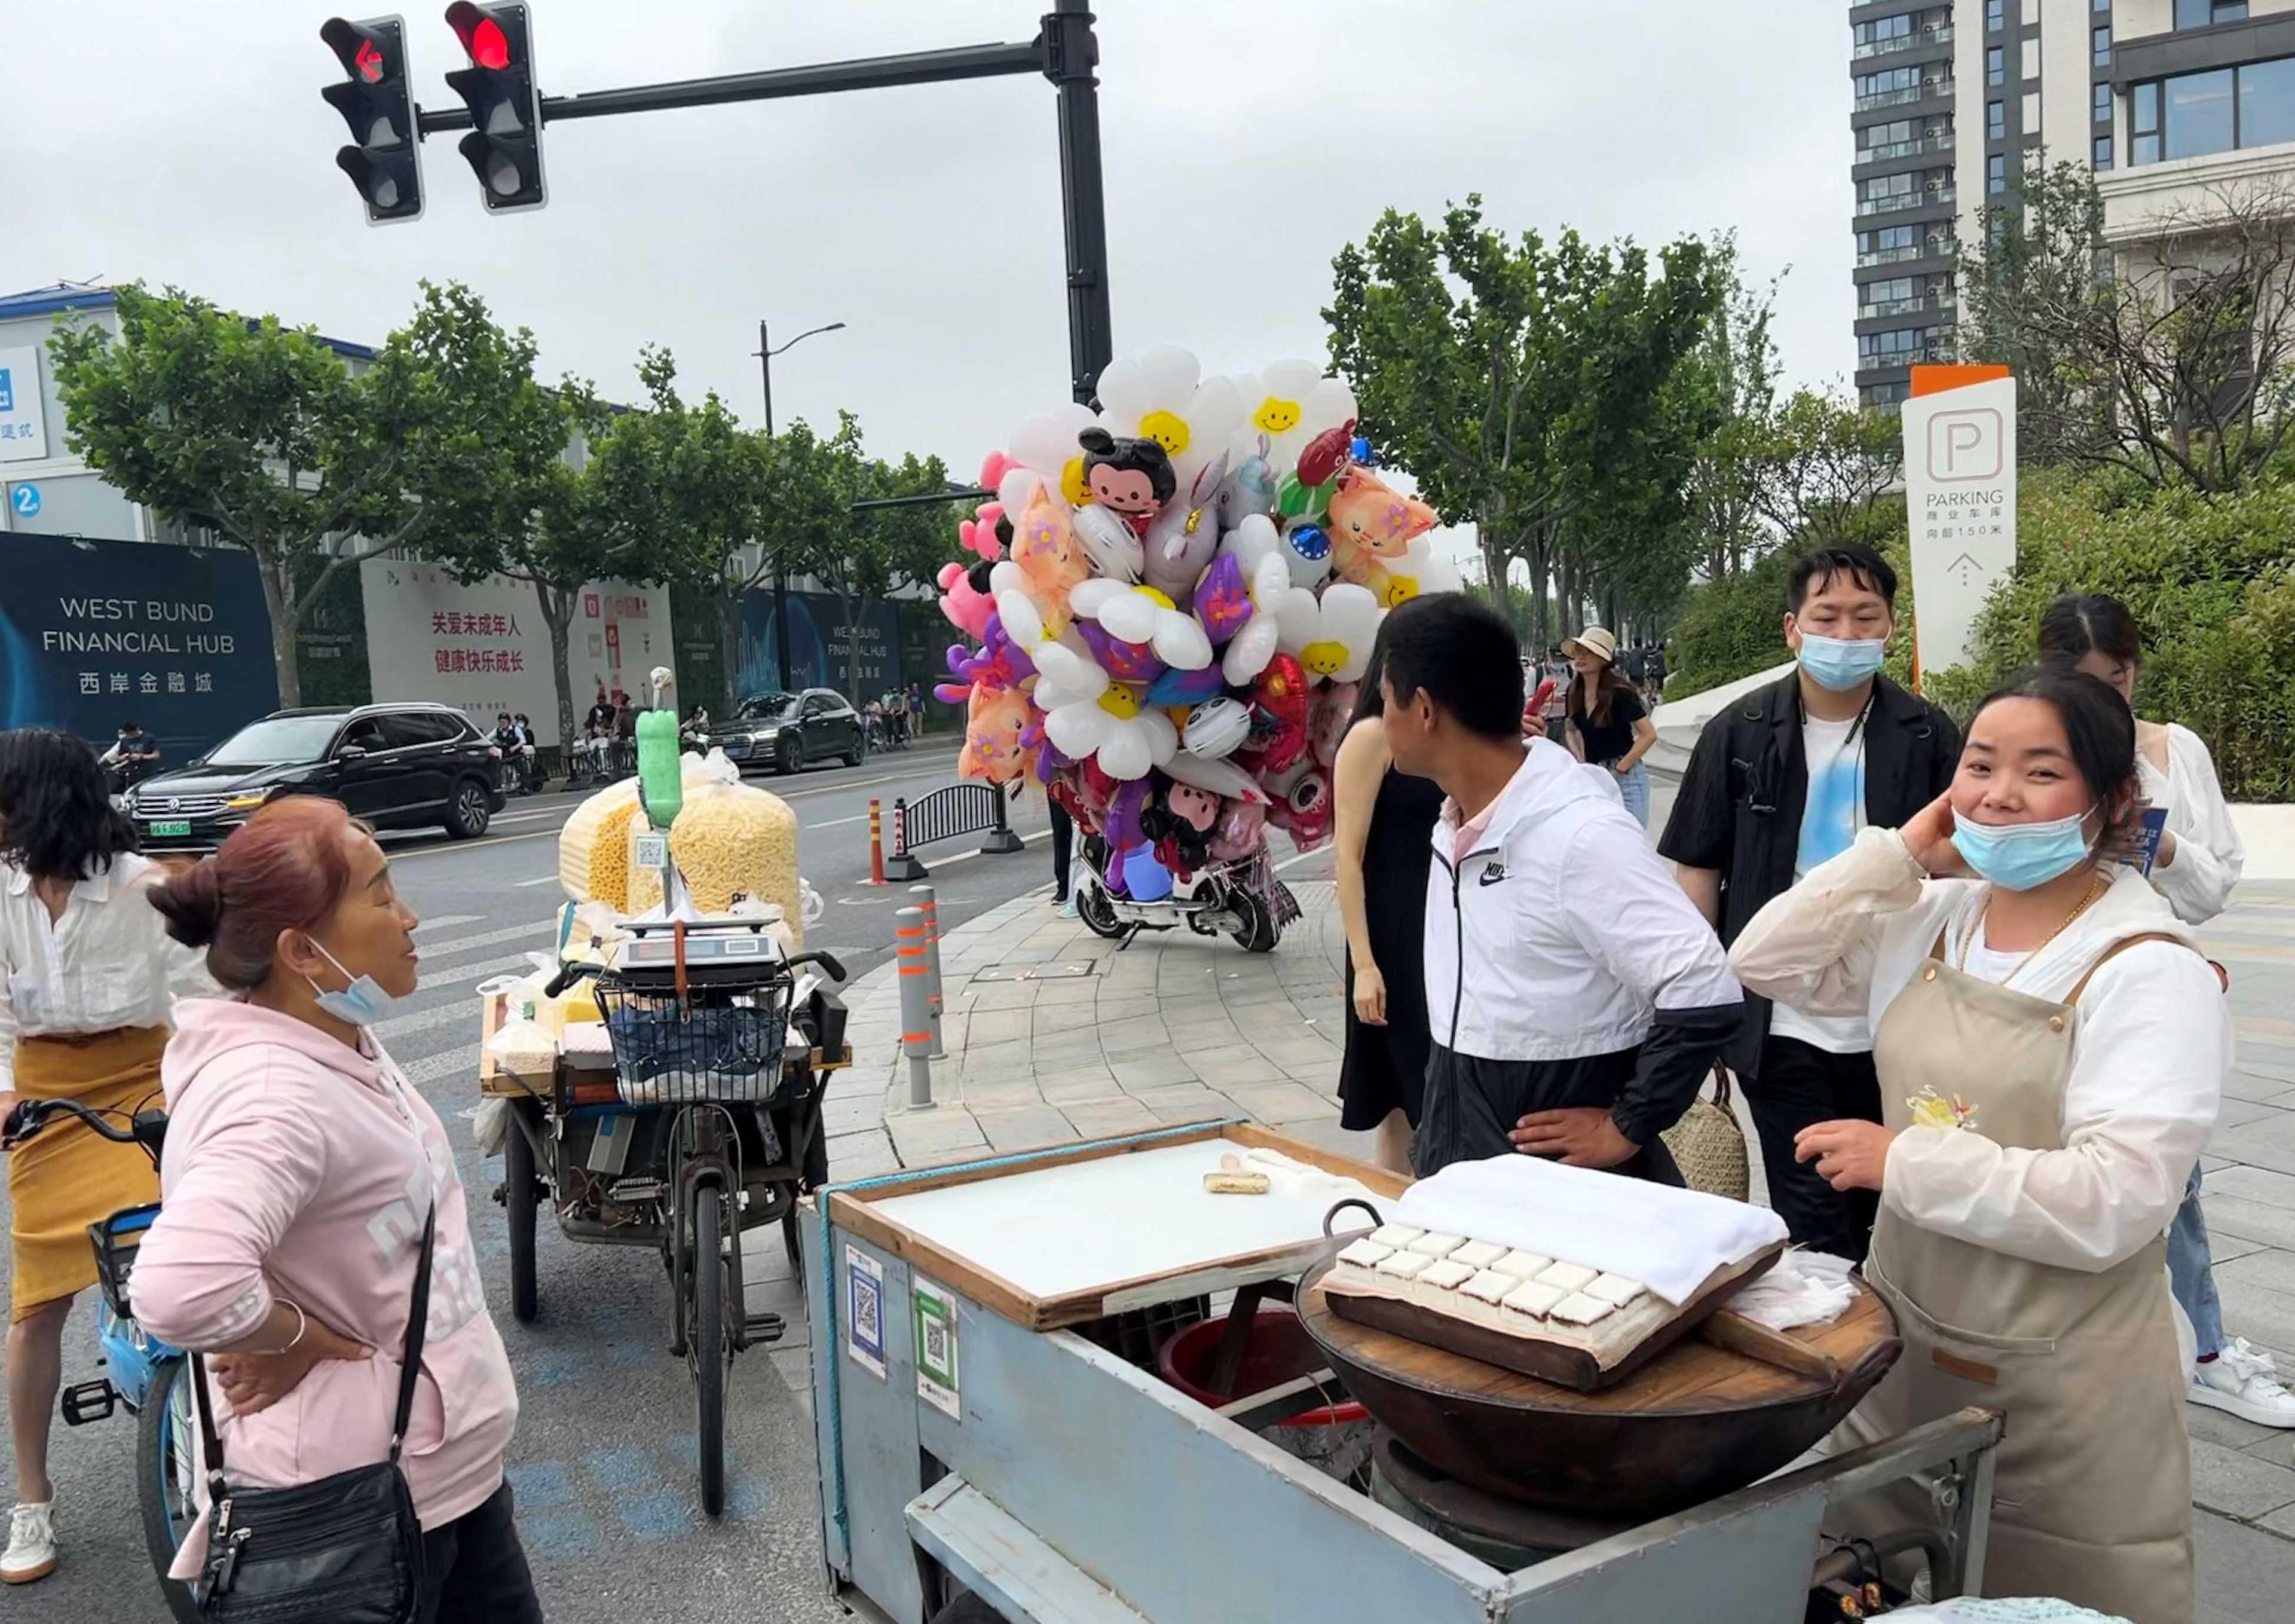 Wang Chunxiang waits for customers as she sells steamed sweet rice cake on a wheel cart among other street vendors in Shanghai, China May 21. Photo: Reuters